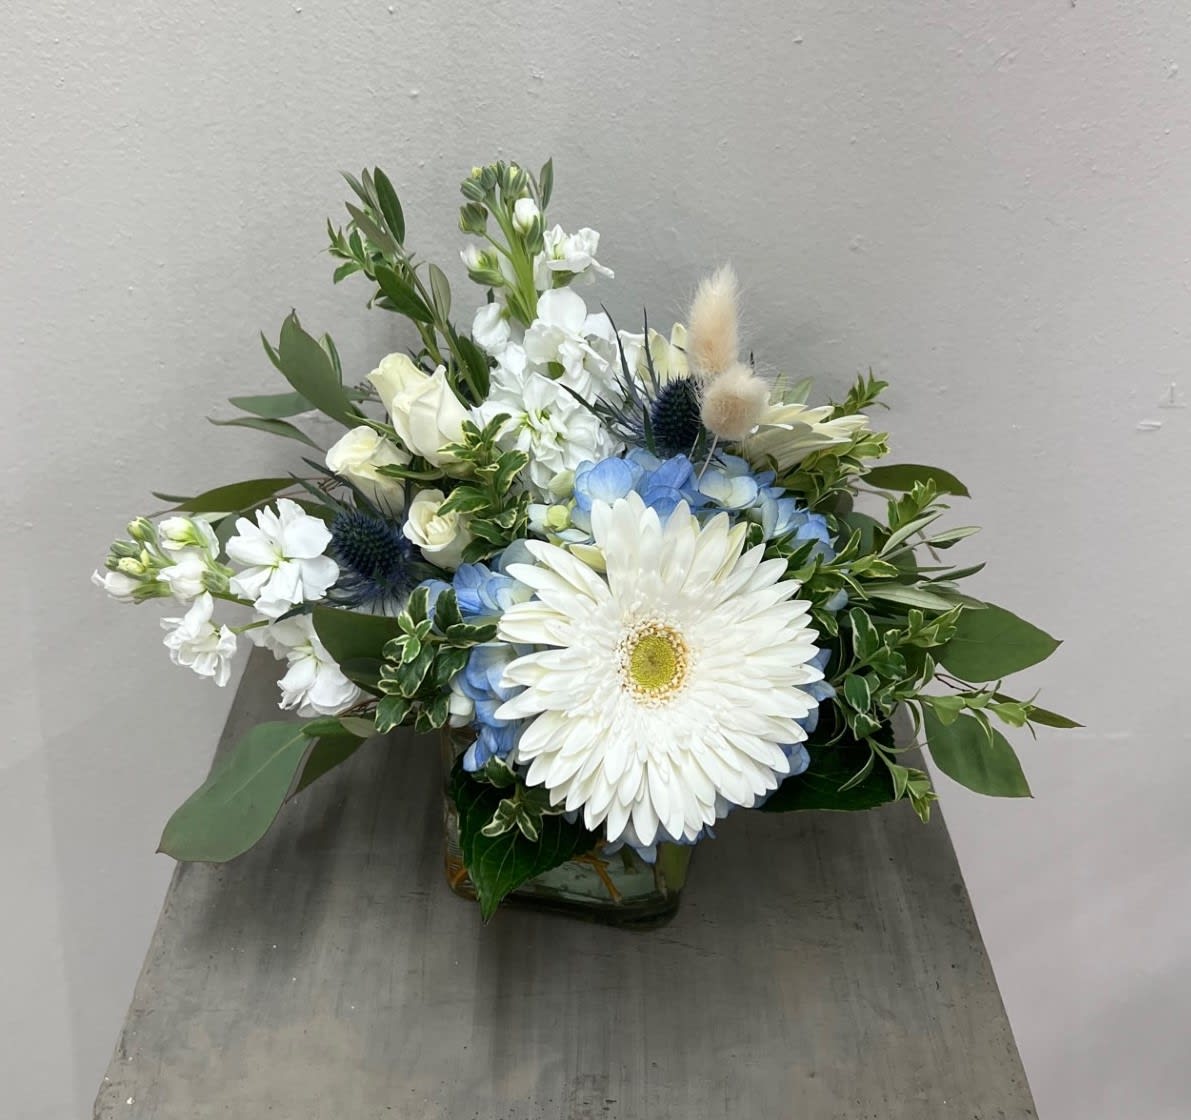 Blue &amp; White Delight - Delightful Blue Hydrangeas, White Gerbera Daisies, White Spray Roses, White Stock, Bunny Tail and assorted greenery in a clear cube vase.